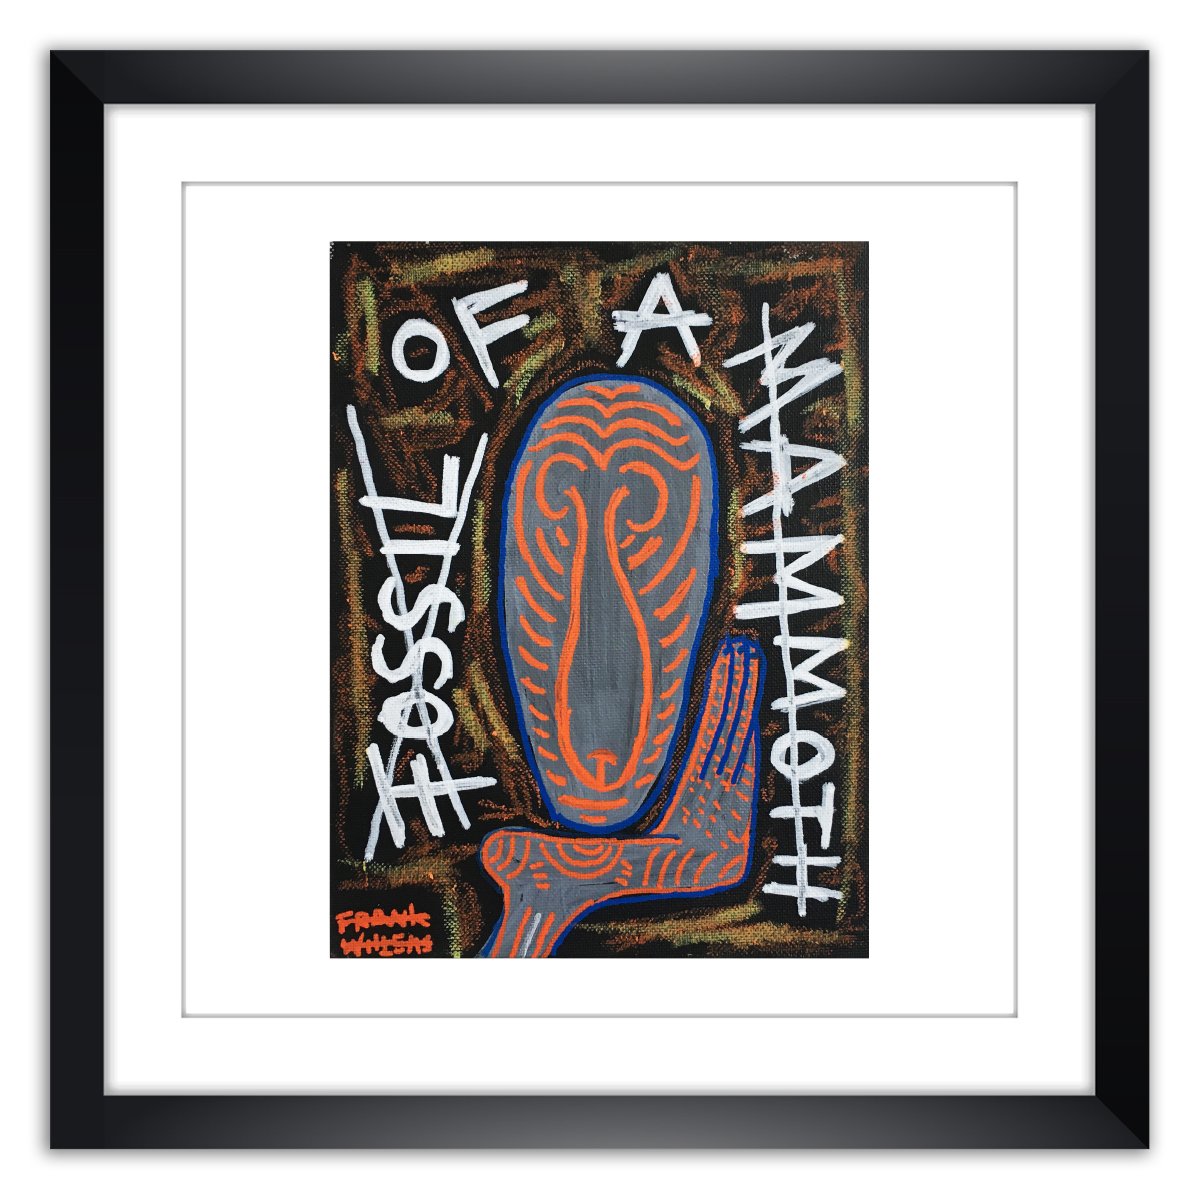 Limited prints - FOSSIL OF A MAMMOTH framed - Frank Willems